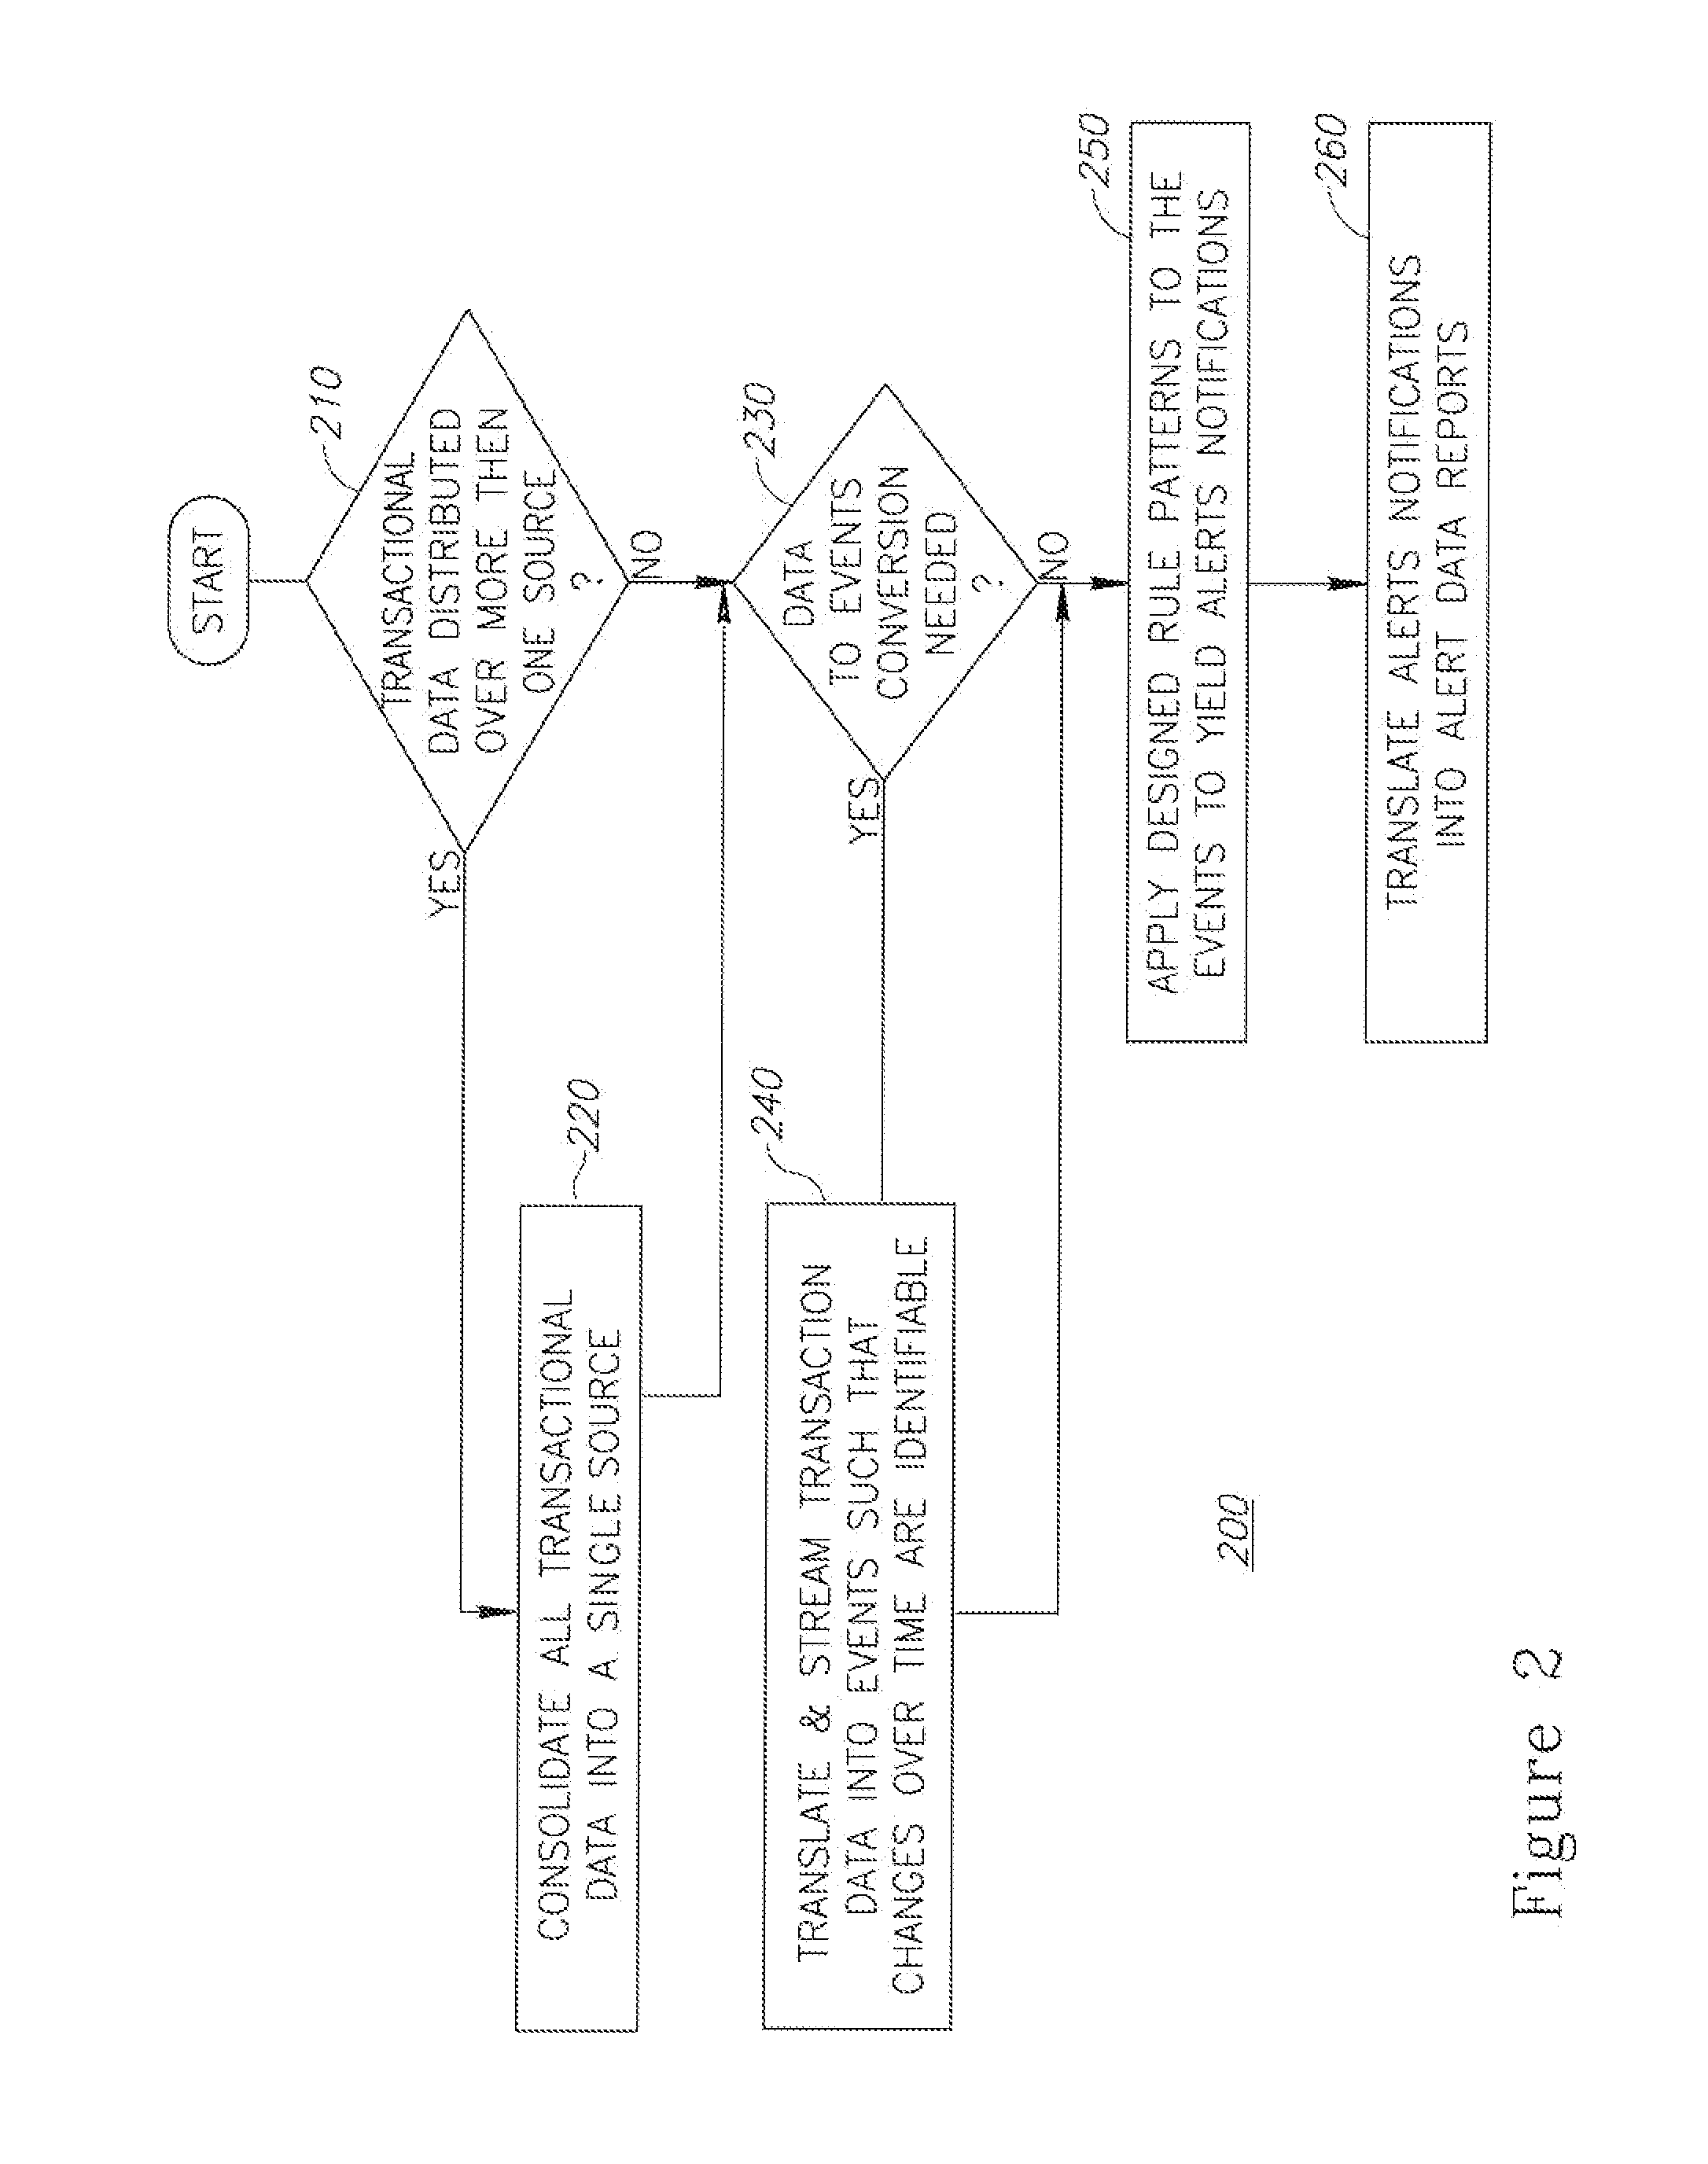 Implementing continuous control monitoring for audit purposes using a complex event processing environment